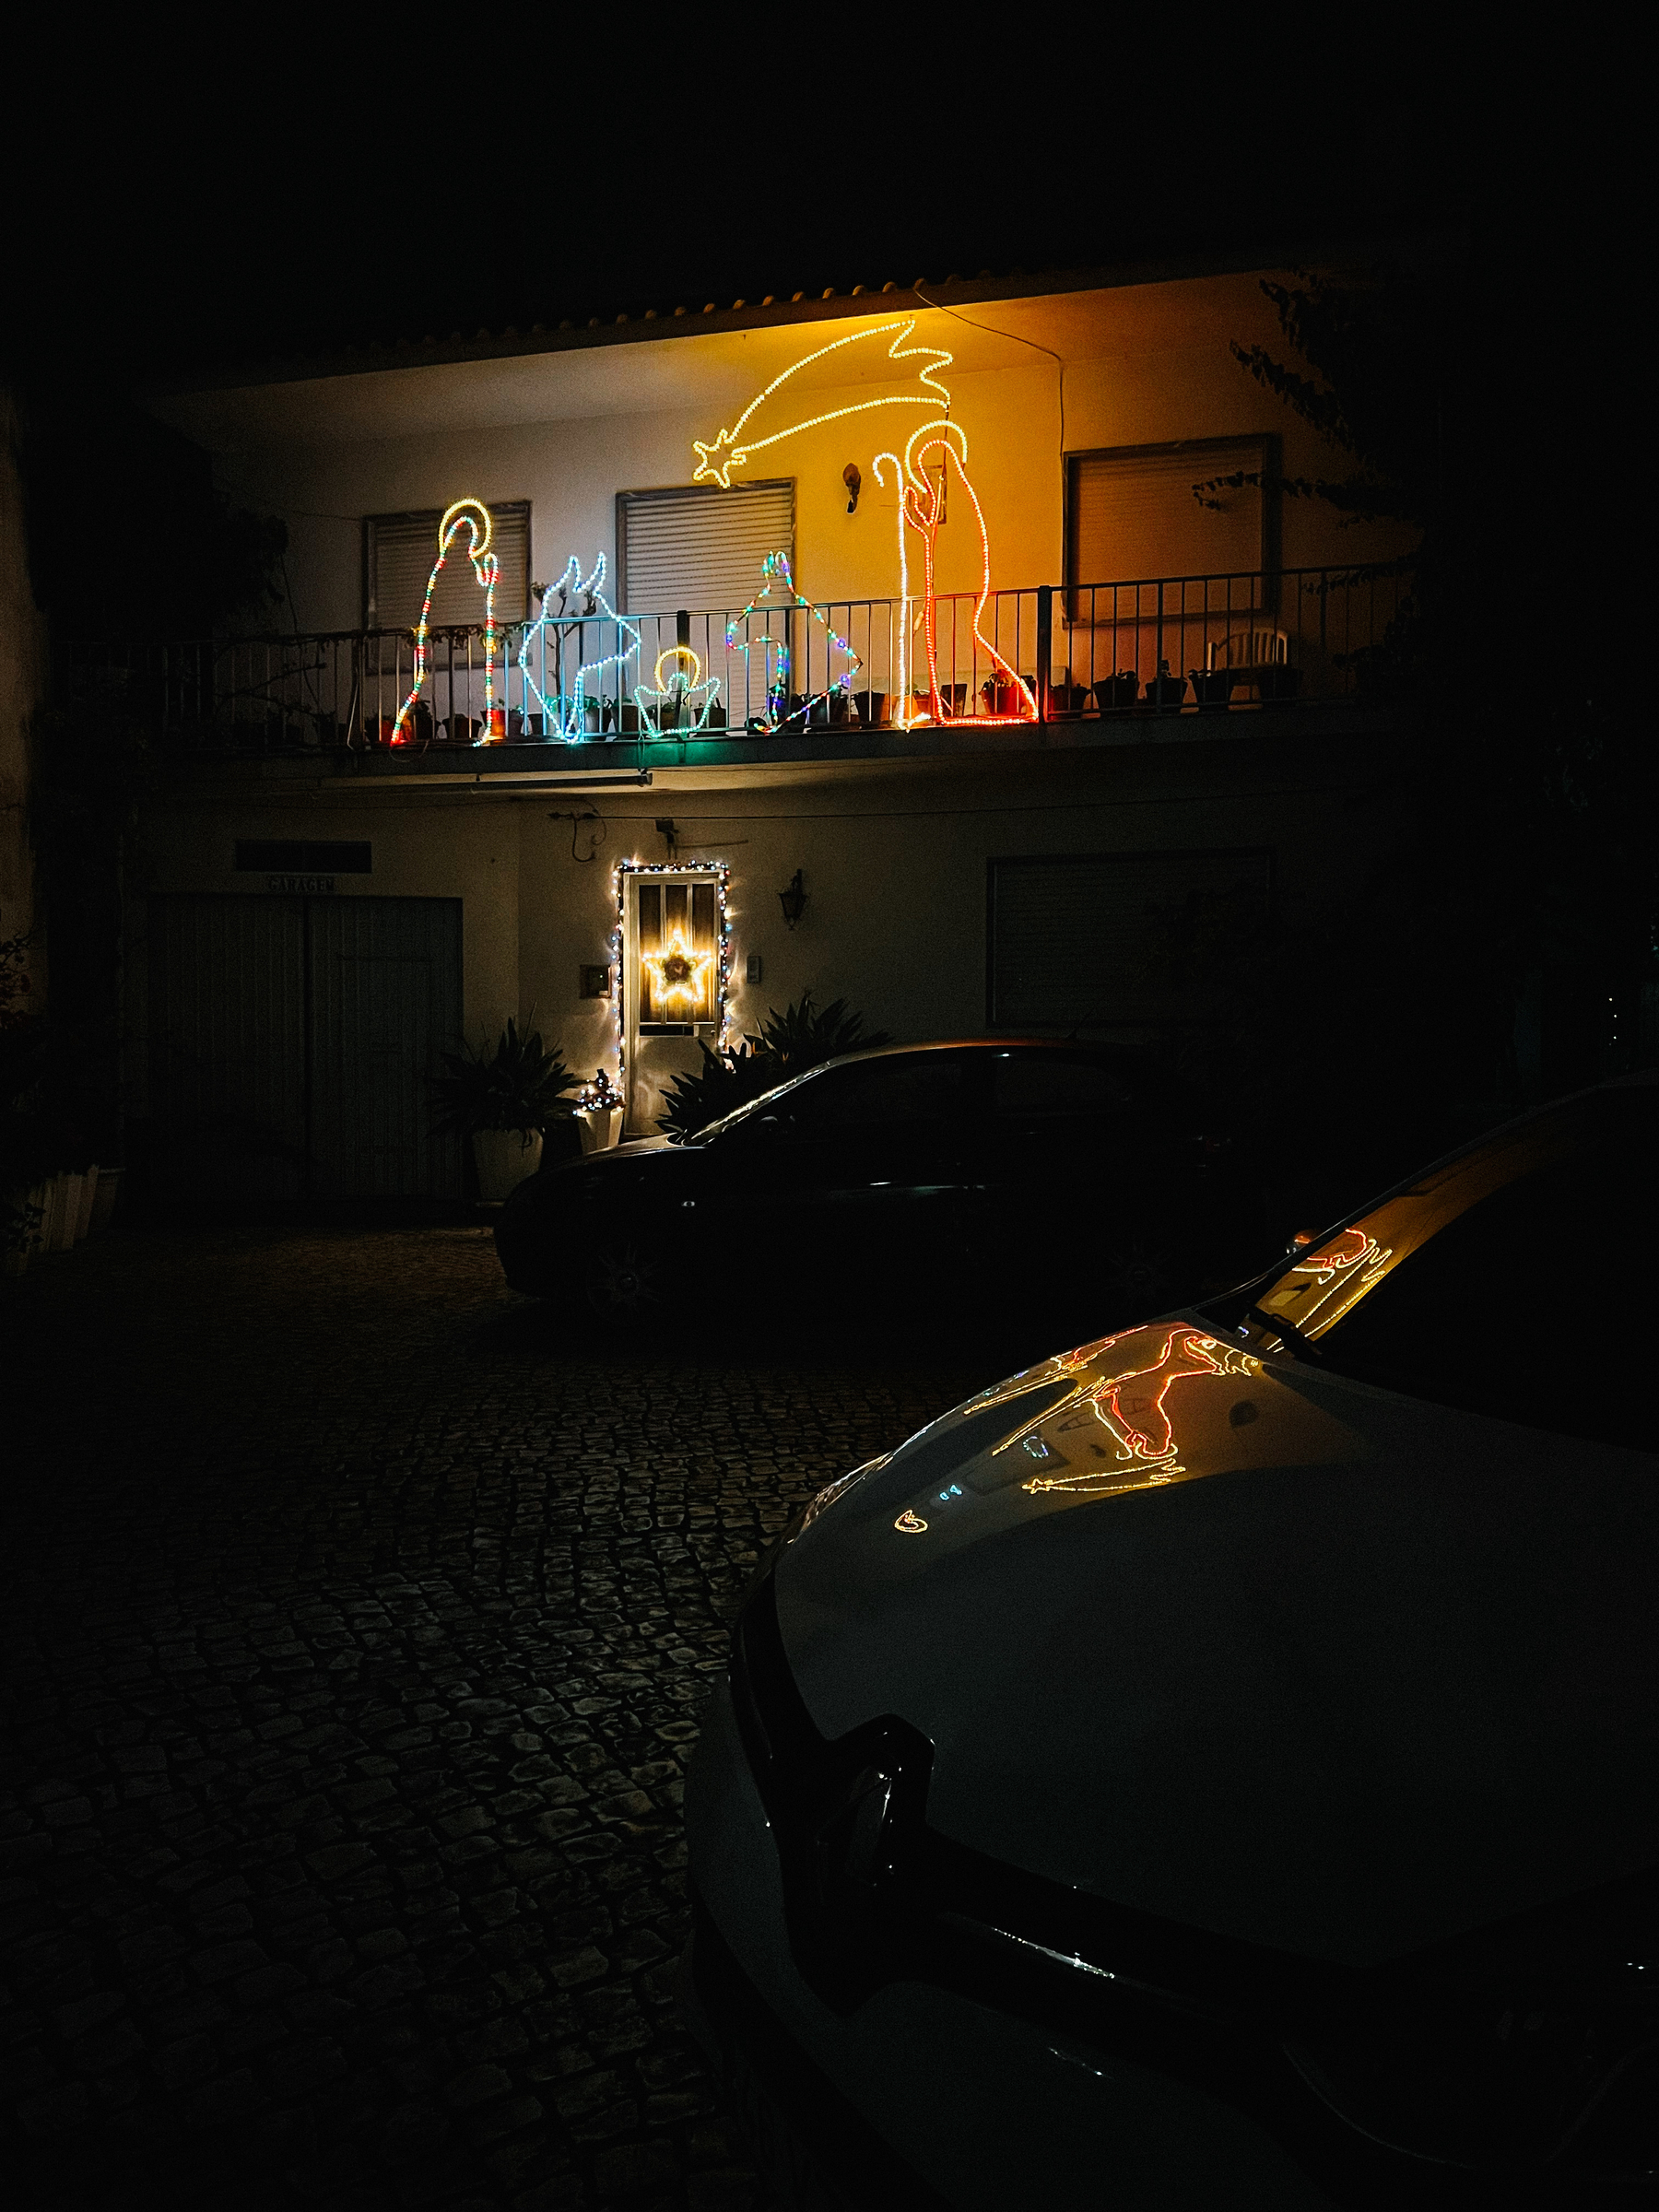 A balcony with Christmas decorations, including illuminated figures of a star and a nativity scene, viewed at night from a street with parked cars.